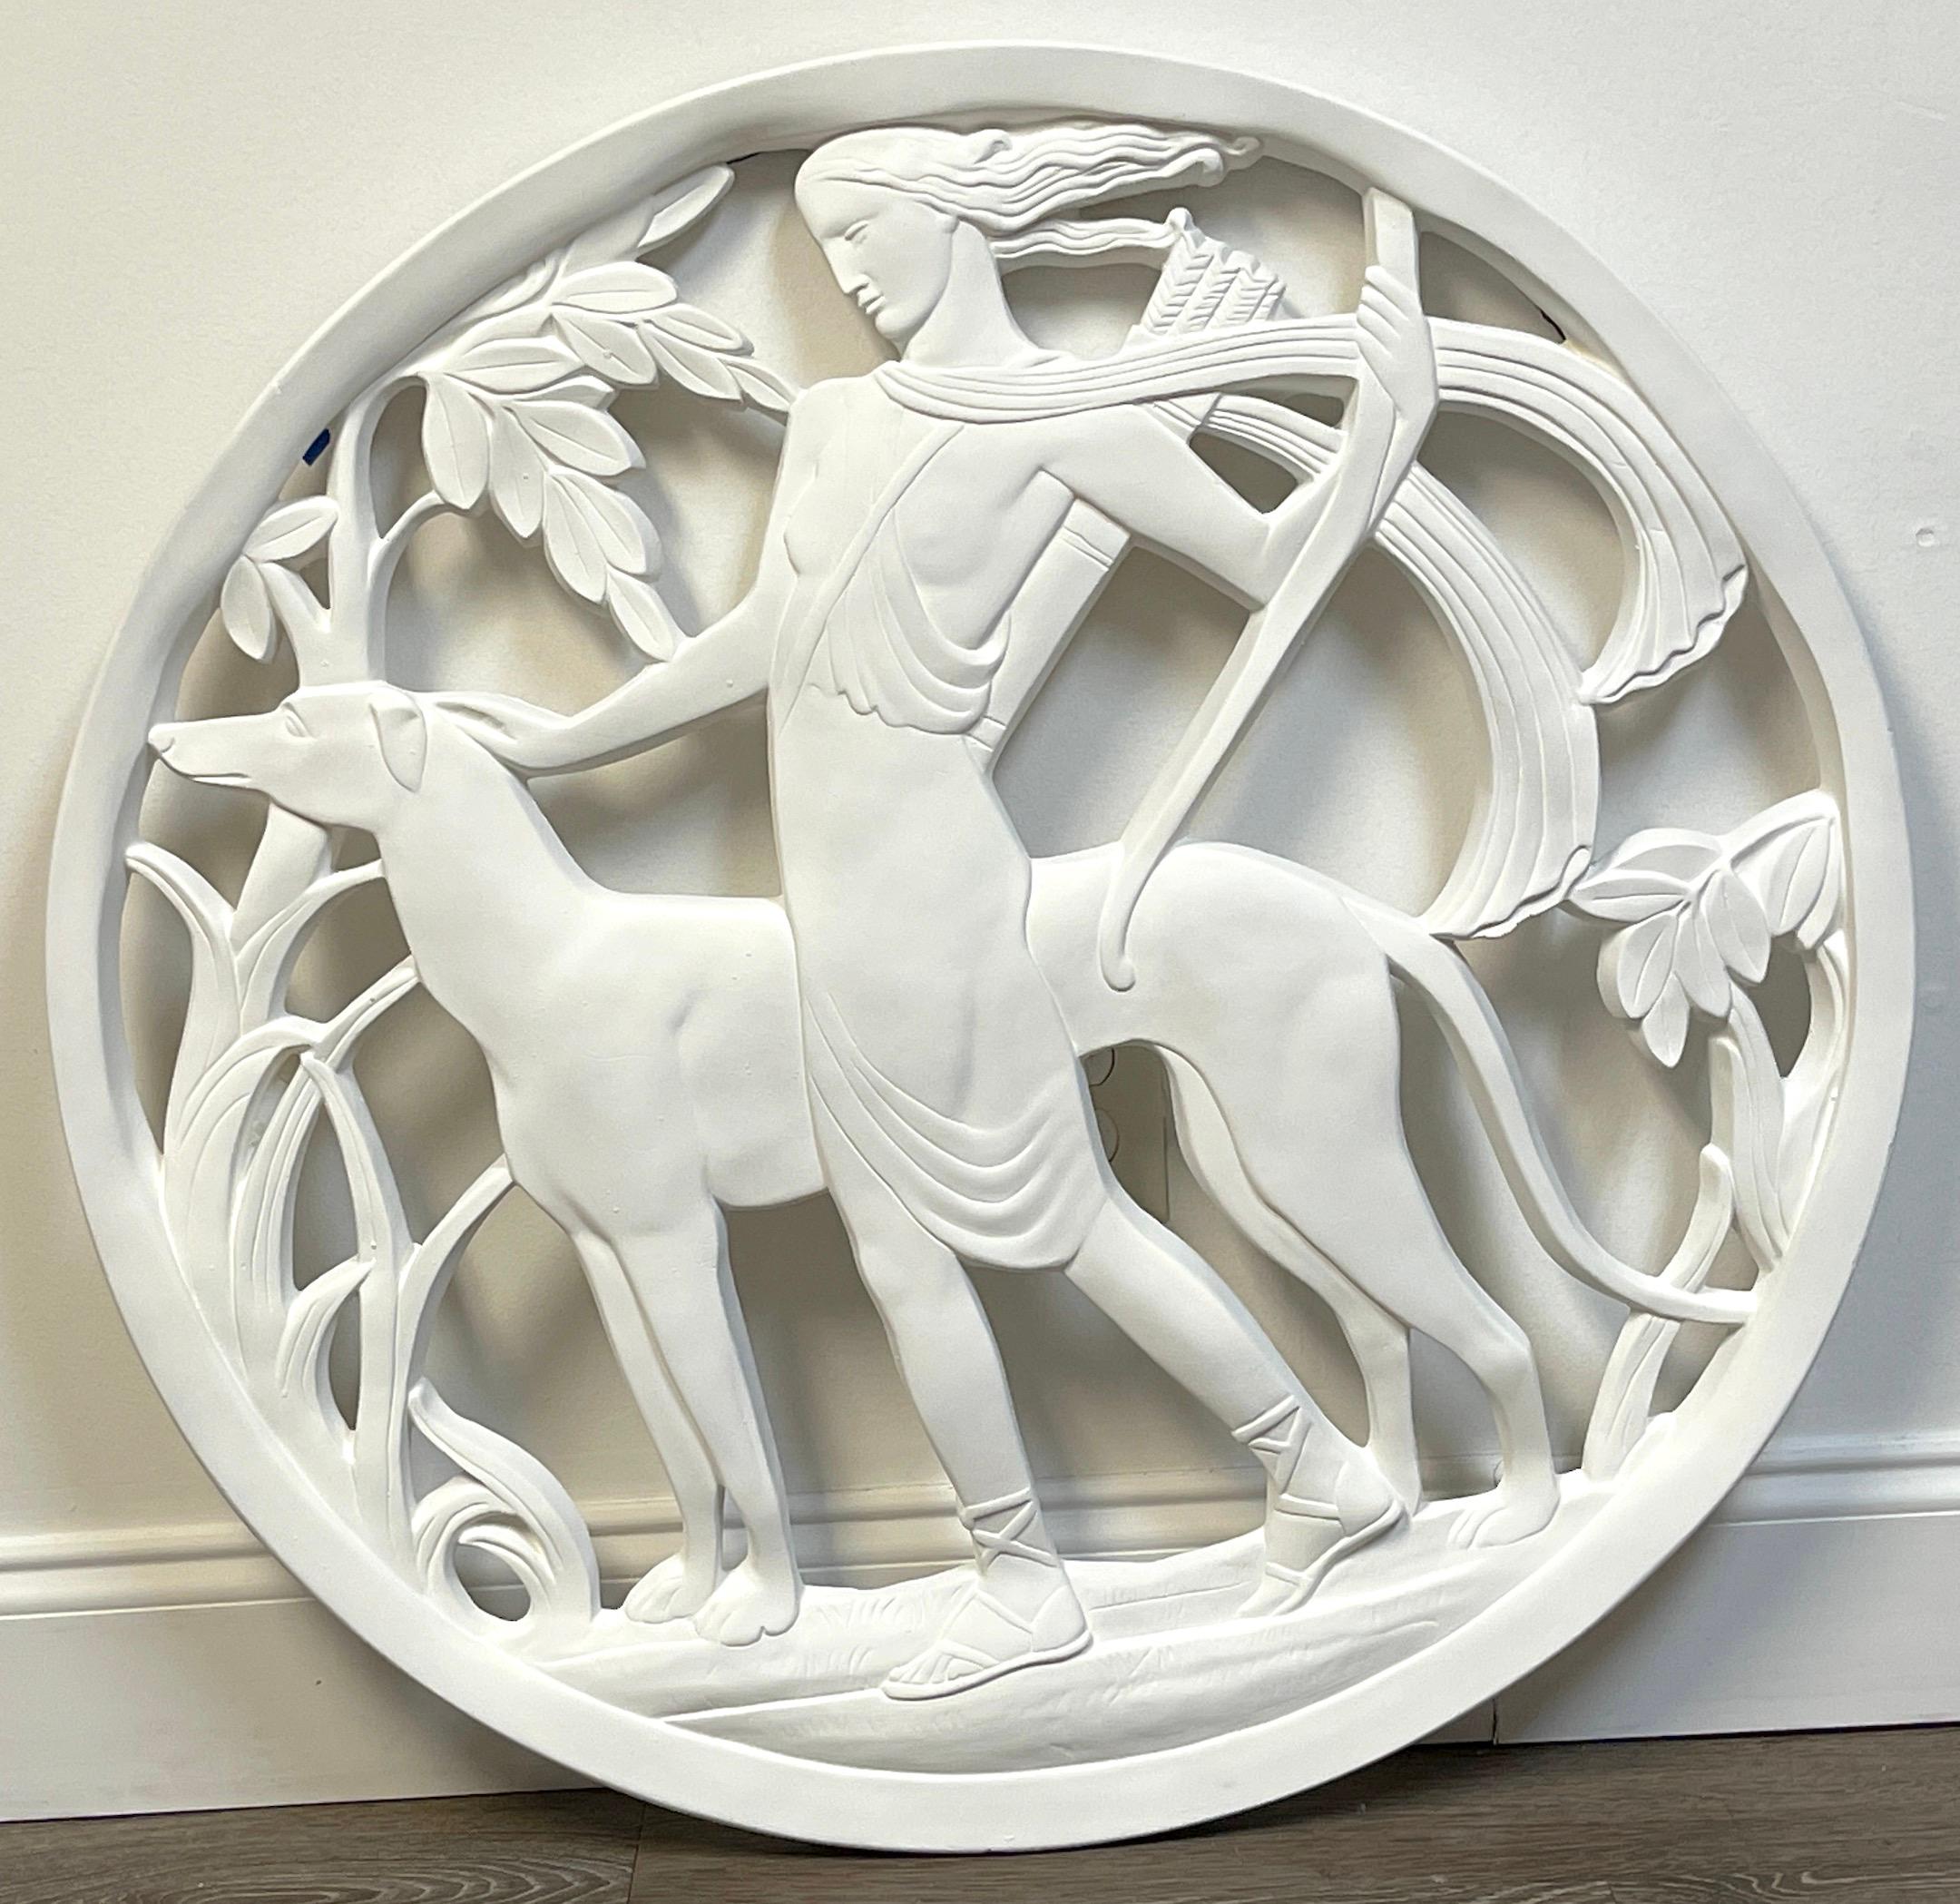 Painted Art Deco Architectural Diana the Huntress Plaster Medallion / Plaque For Sale